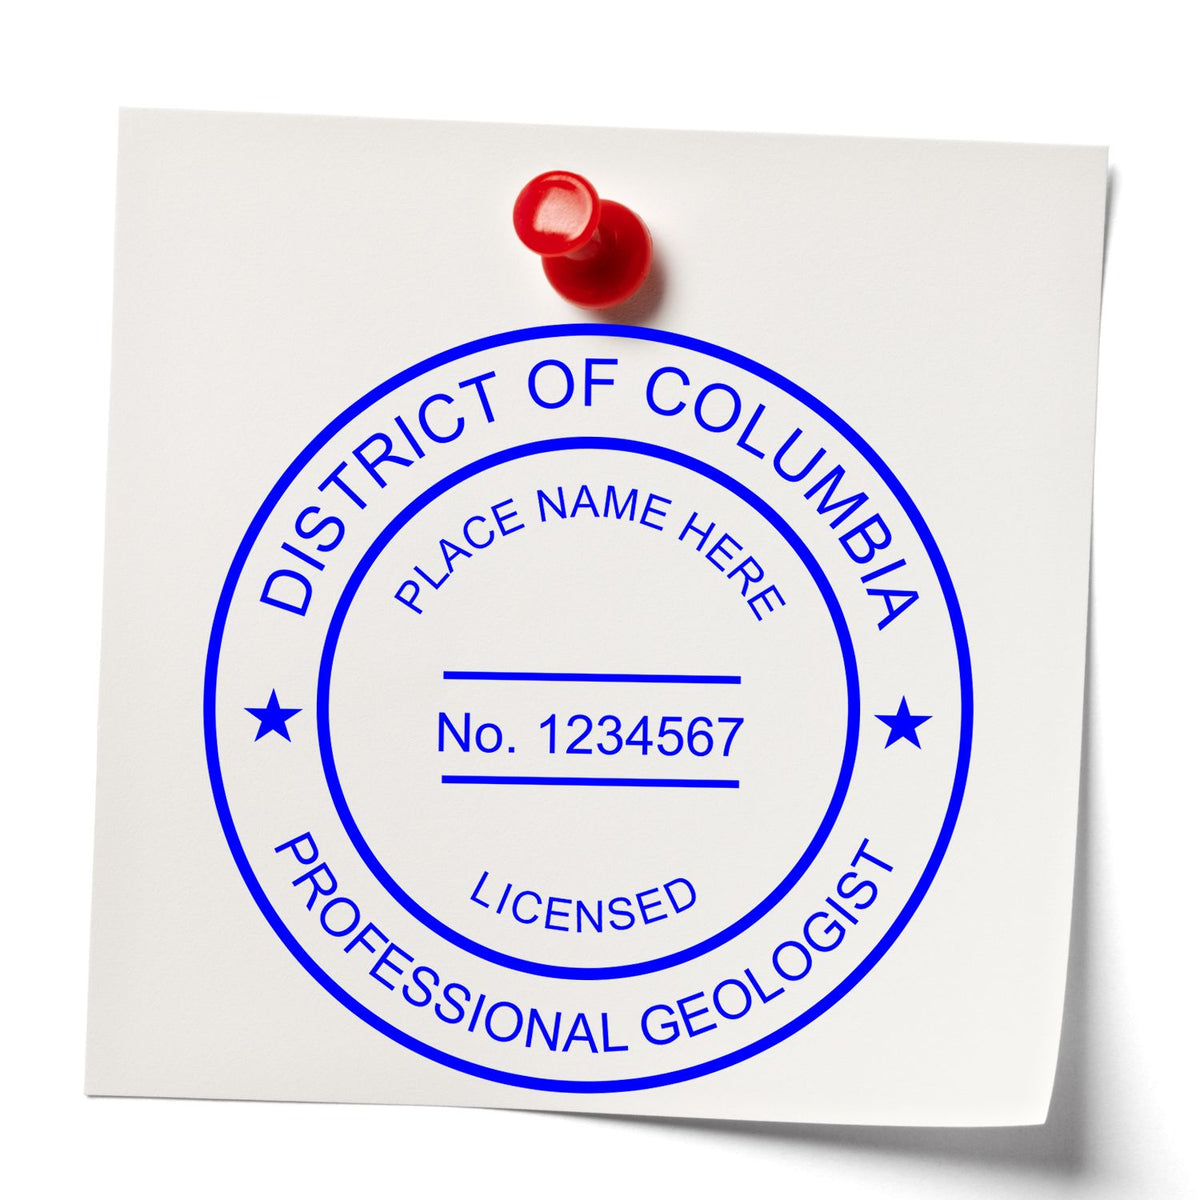 A lifestyle photo showing a stamped image of the Digital District of Columbia Geologist Stamp, Electronic Seal for District of Columbia Geologist on a piece of paper